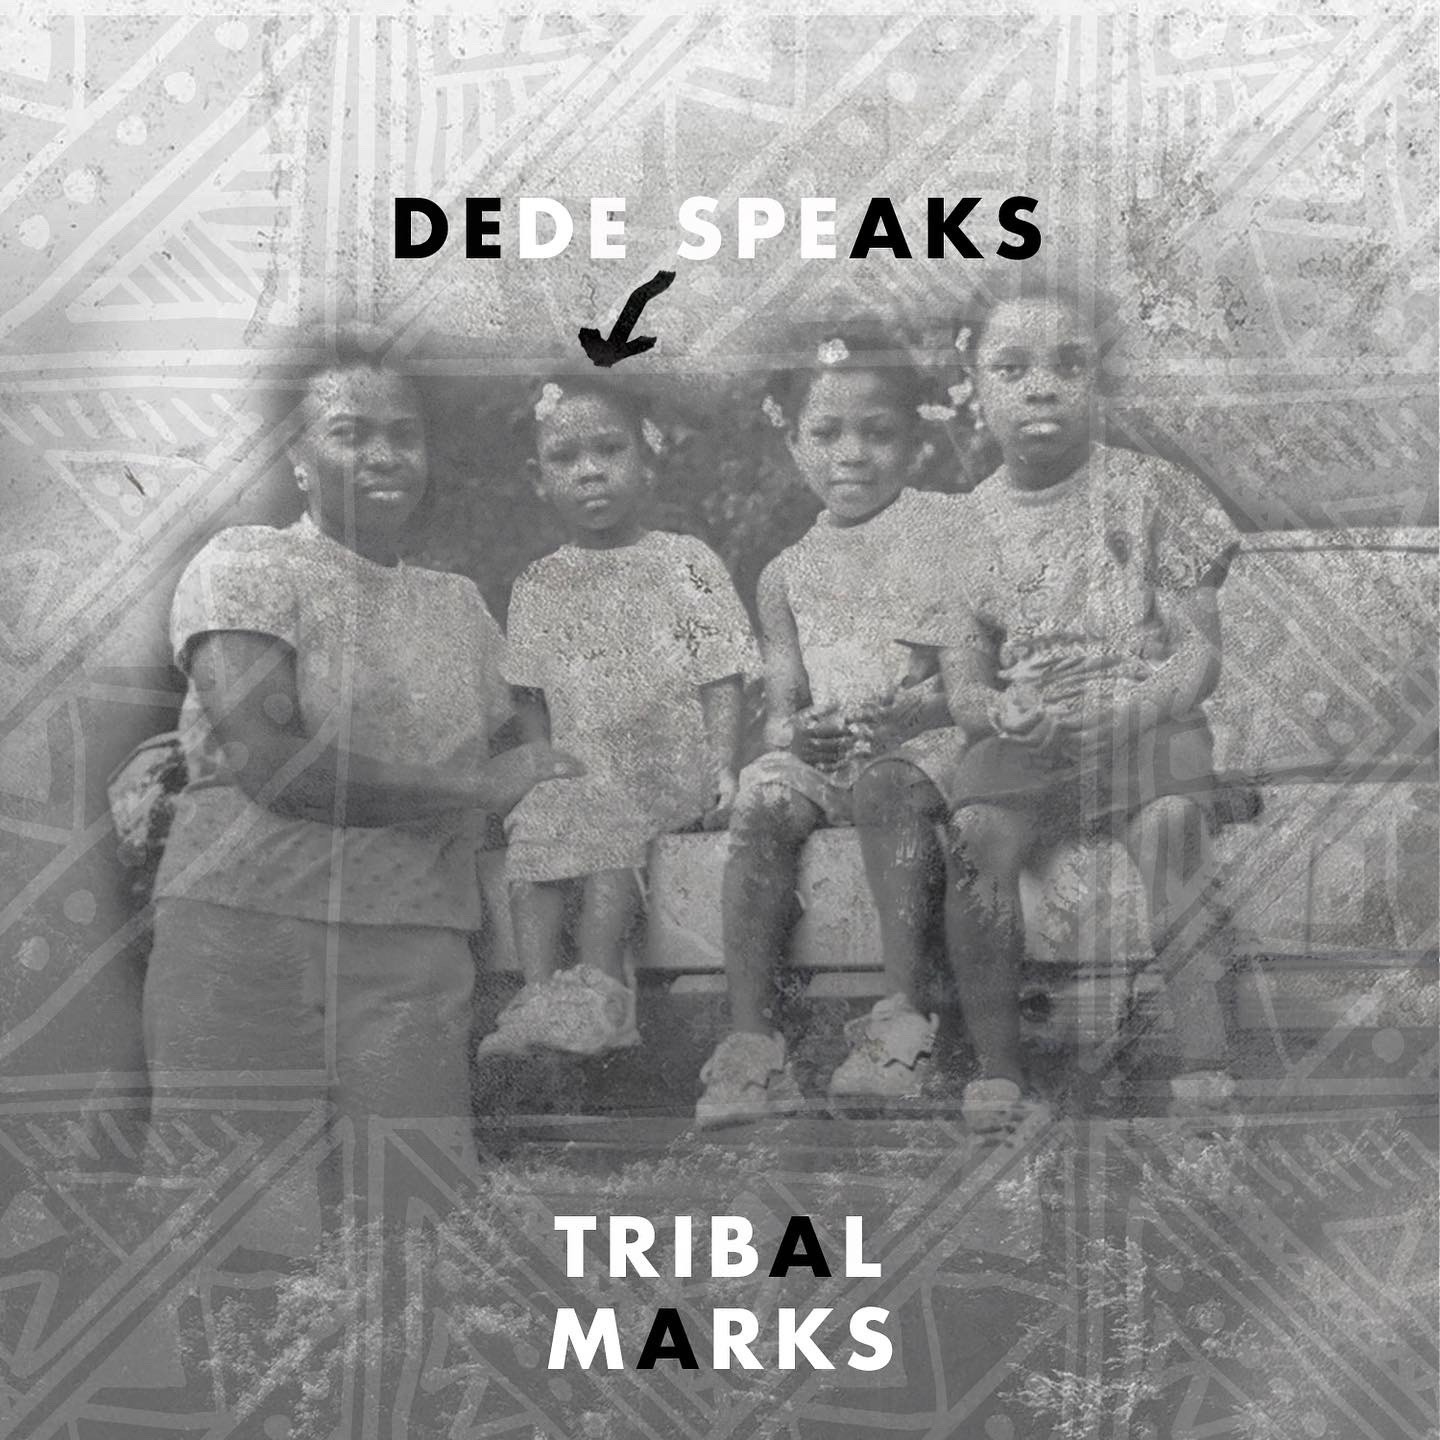 Dede Speaks to bare it all on her Tribal Marks EP